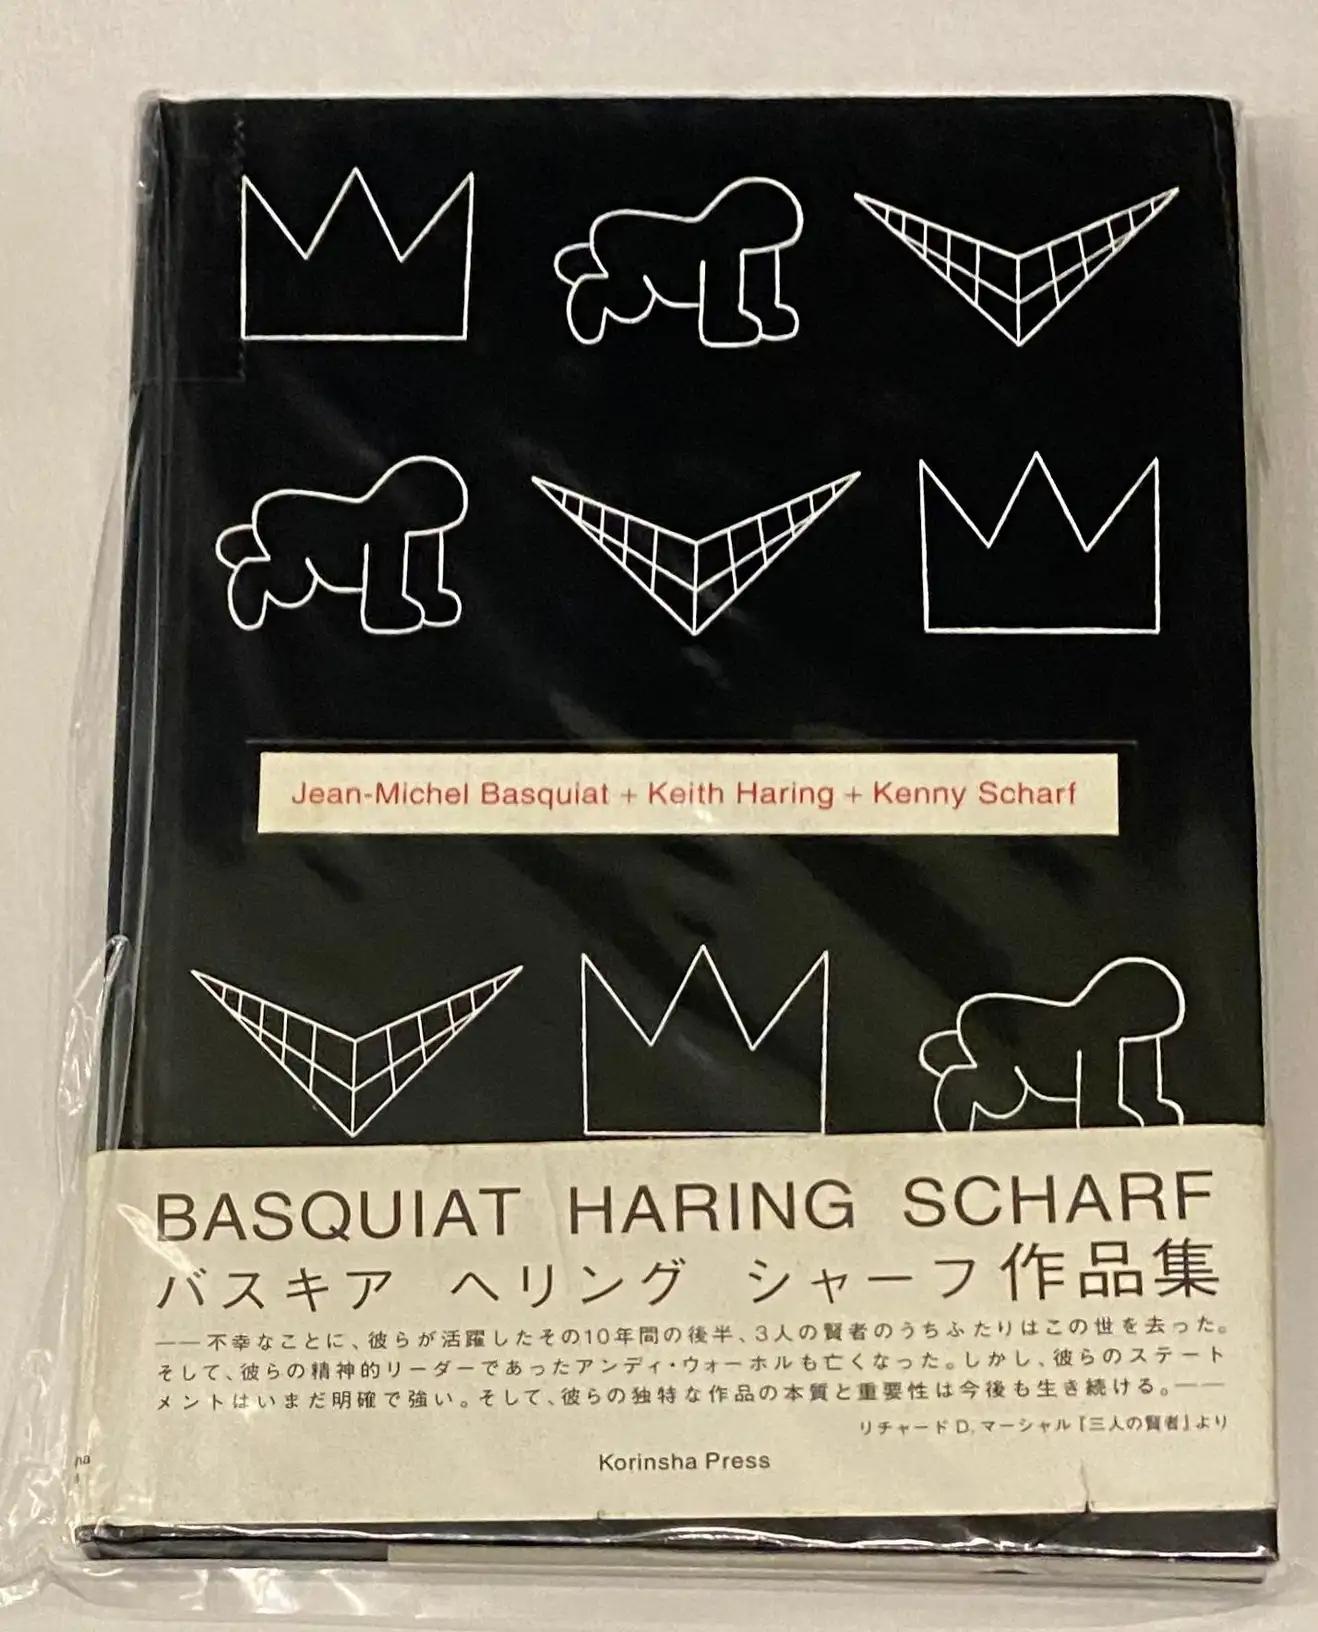 Basquiat Keith Haring Kenny Scharf exhibition catalog 1998 For Sale 4